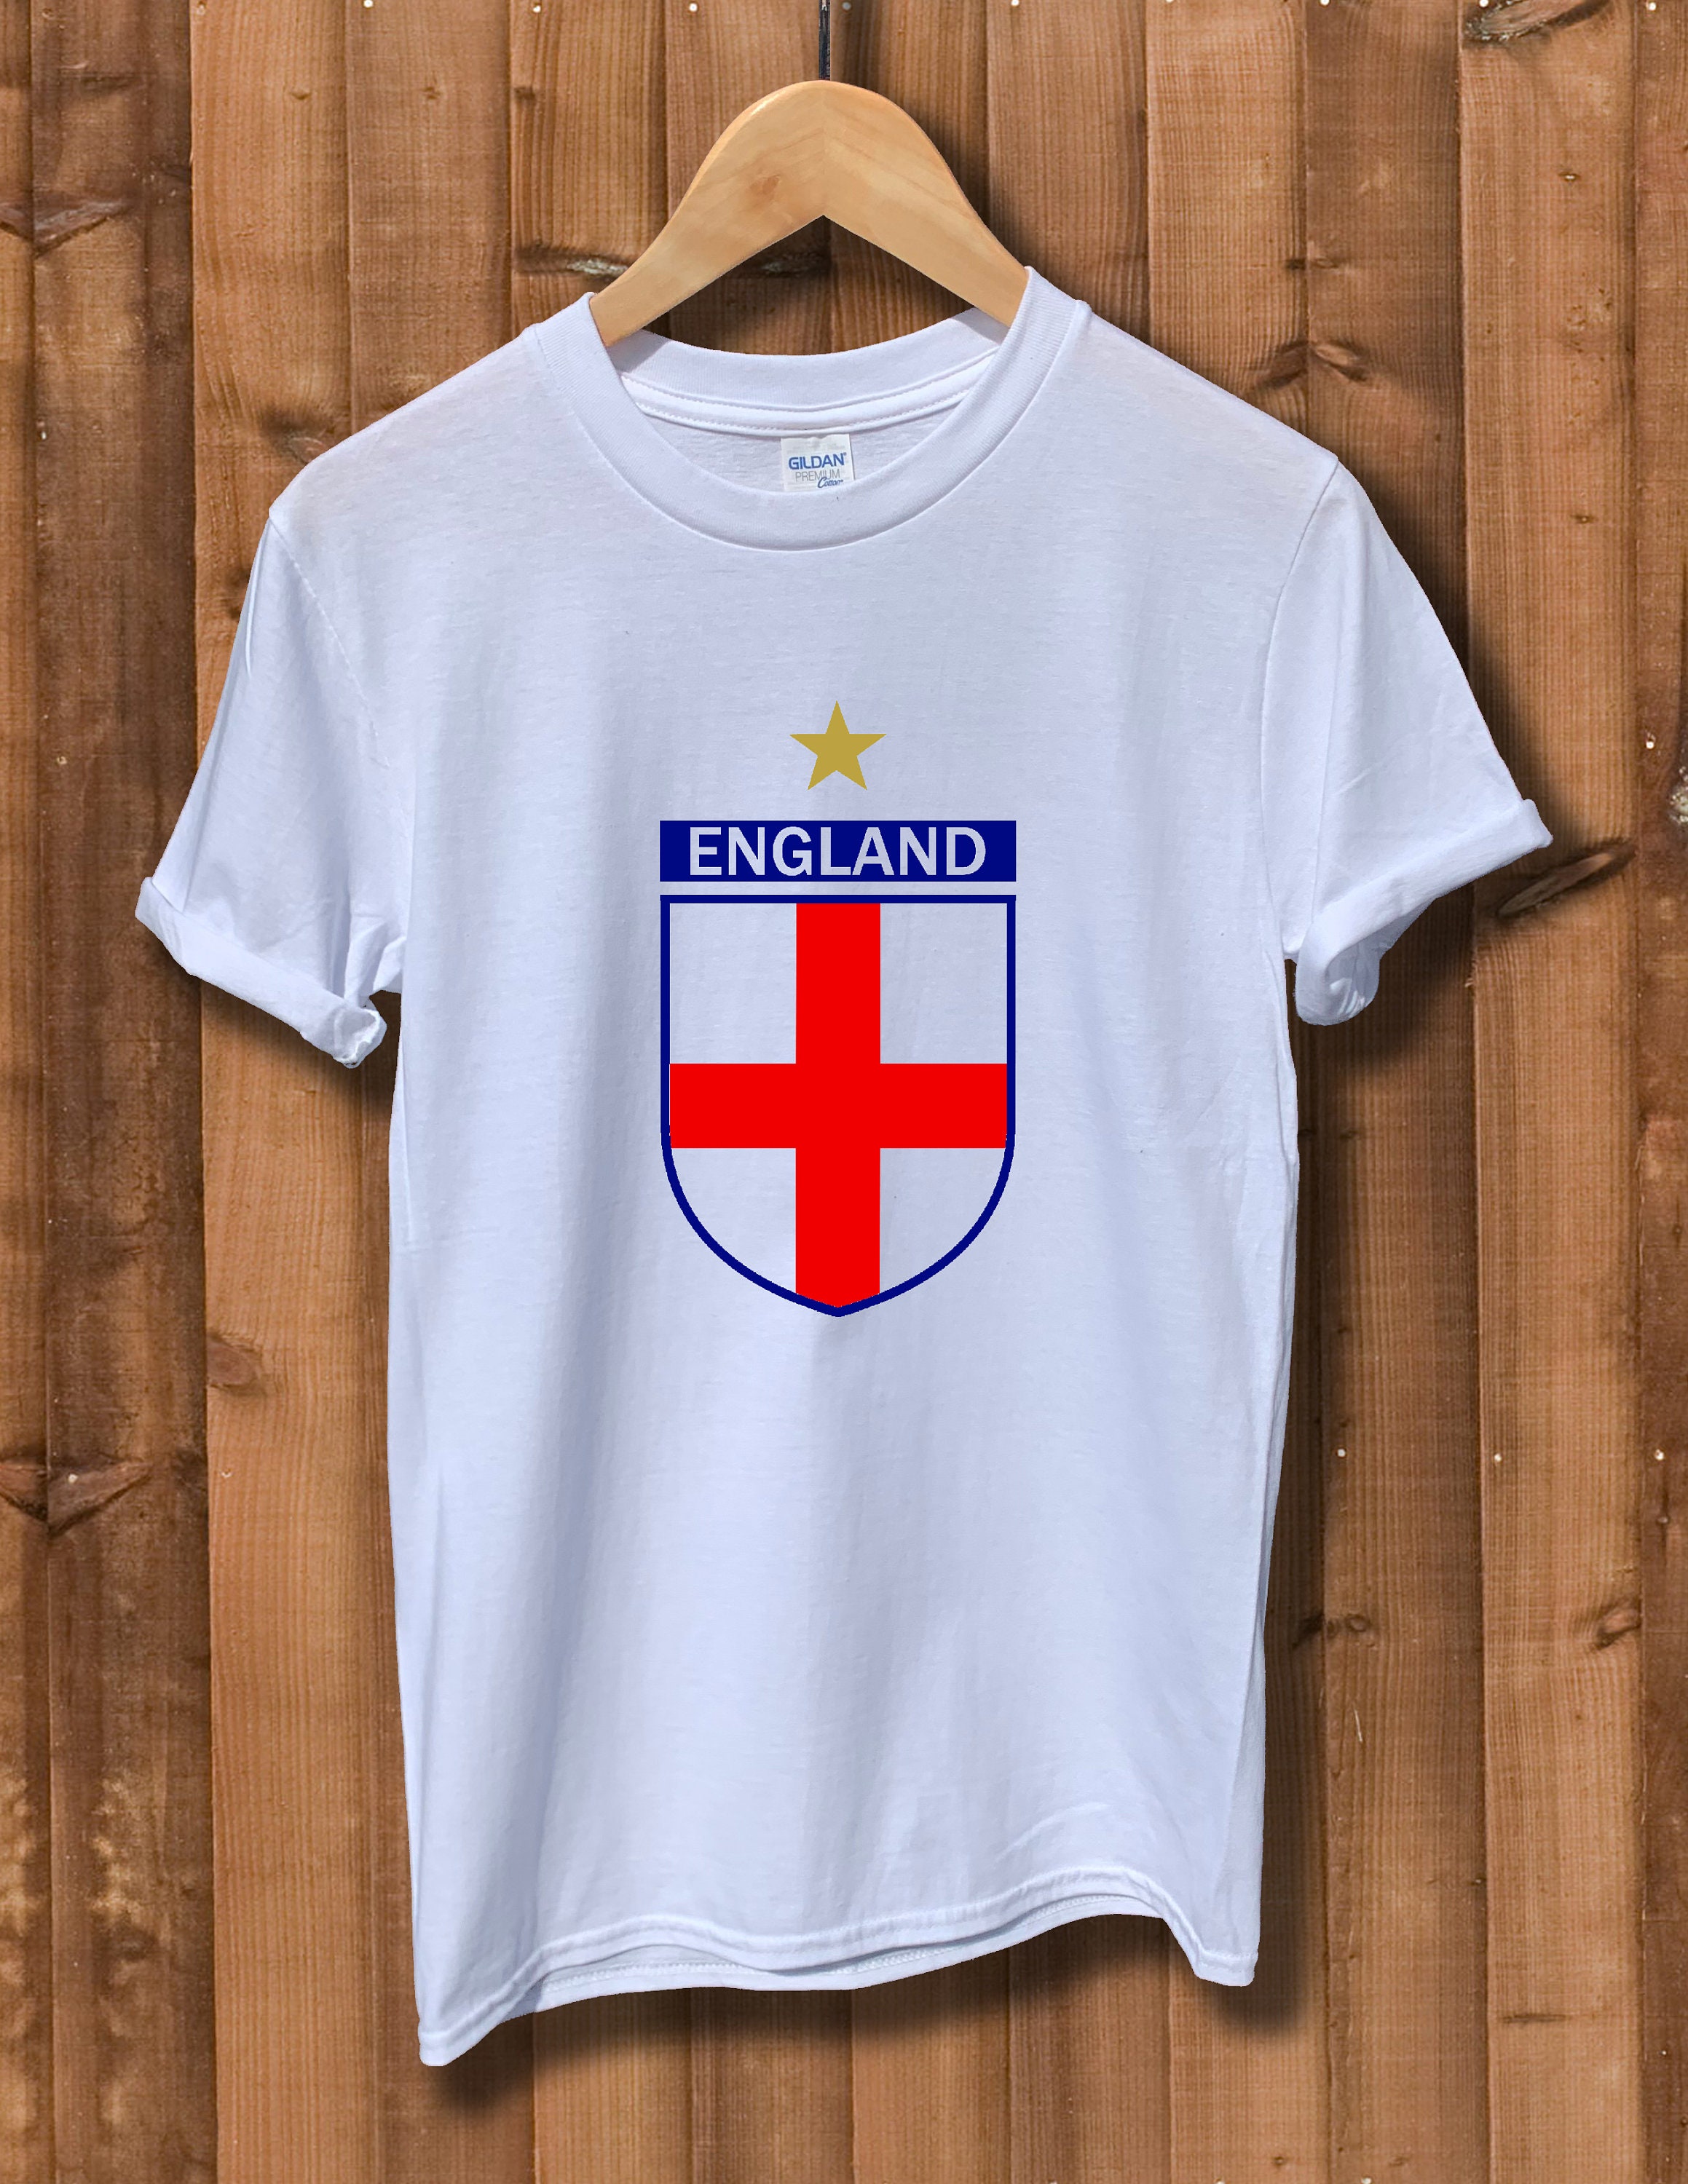 Discover England Football World Cup T-shirt